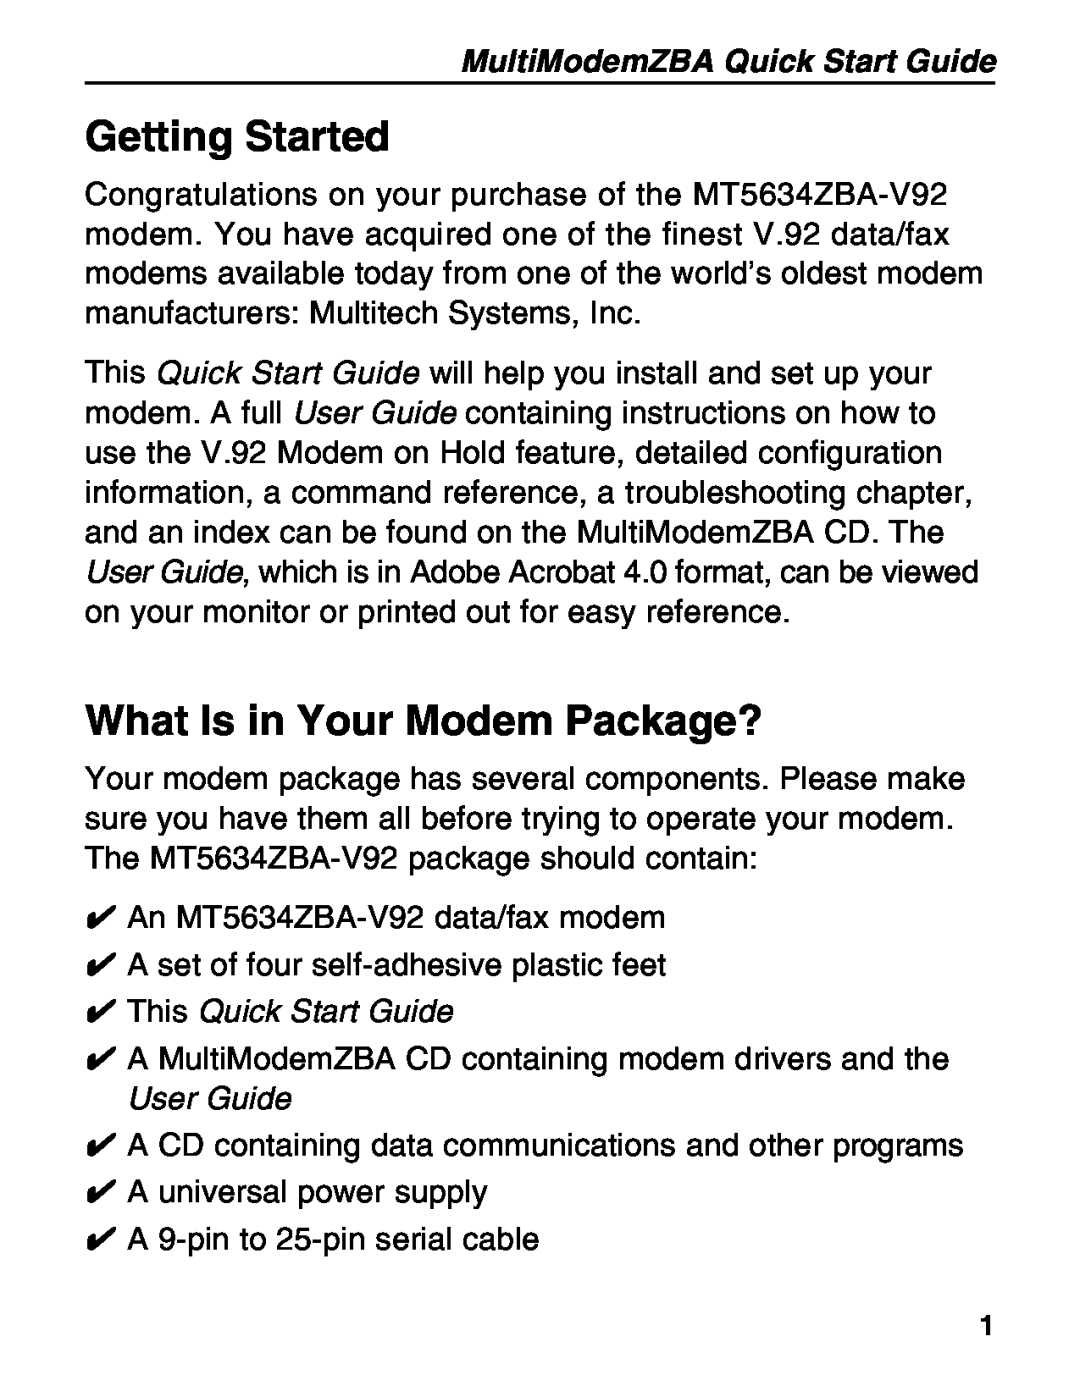 Multitech MT5634ZBA-V92 manual Getting Started, What Is in Your Modem Package?, MultiModemZBA Quick Start Guide 